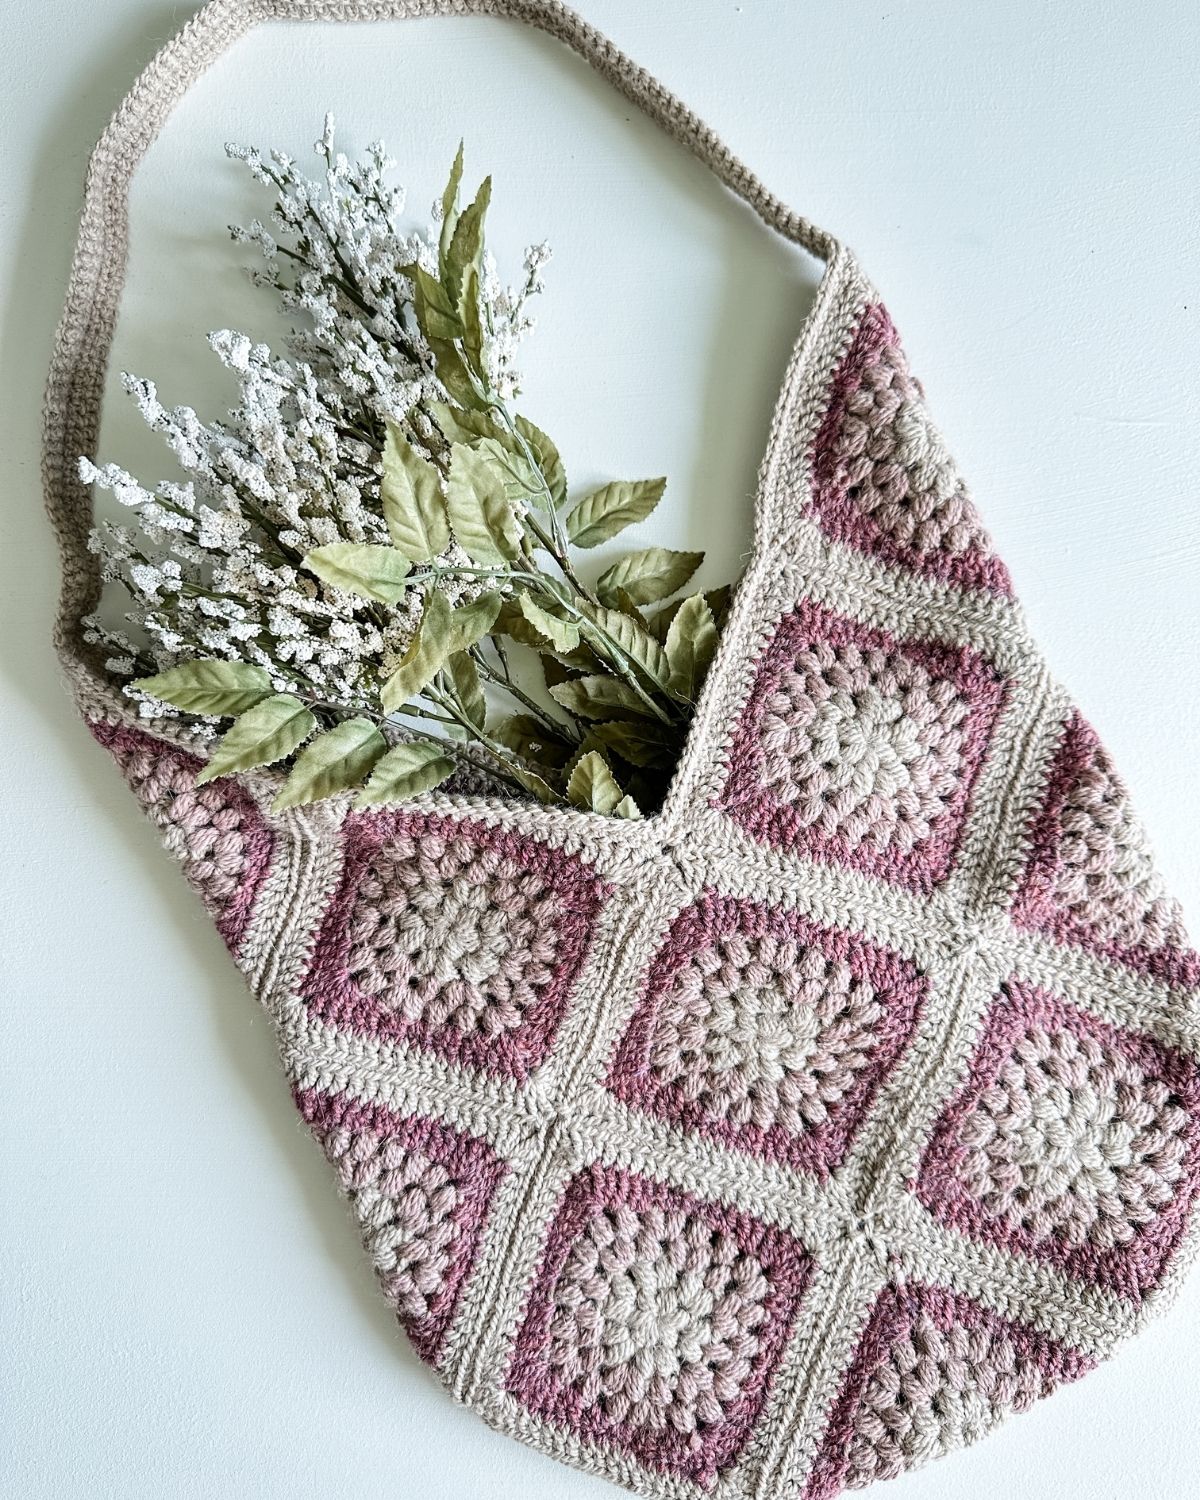 EASY CROCHET: Granny Square Tote Bag (How to Join Crochet Squares